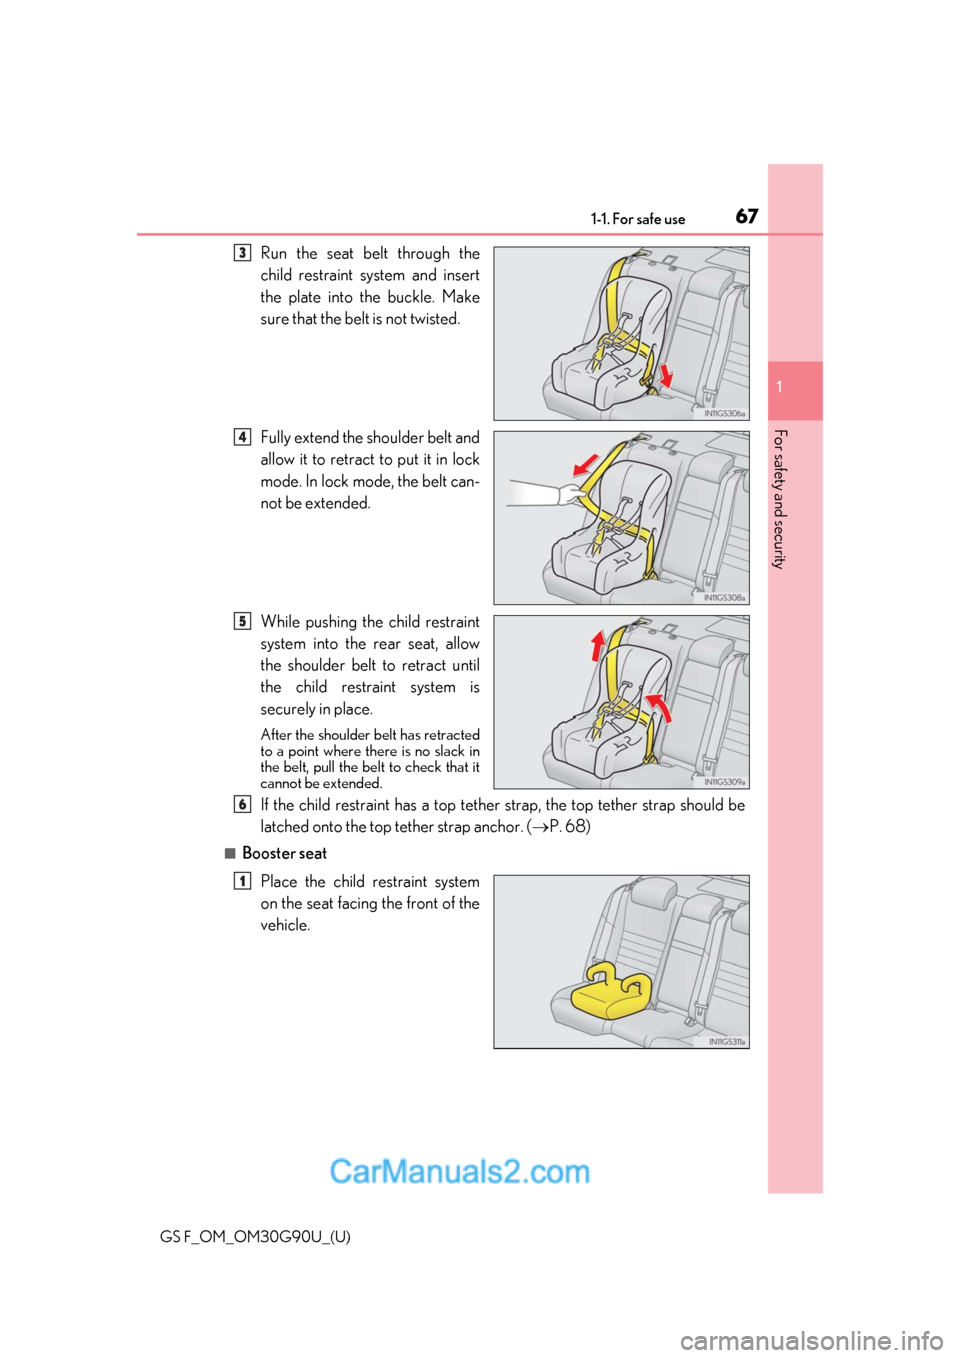 Lexus GS F 2019  s Repair Manual 671-1. For safe use
GS F_OM_OM30G90U_(U)
1
For safety and security
Run the seat belt through the
child restraint system and insert
the plate into the buckle. Make
sure that the belt is not twisted.
Fu